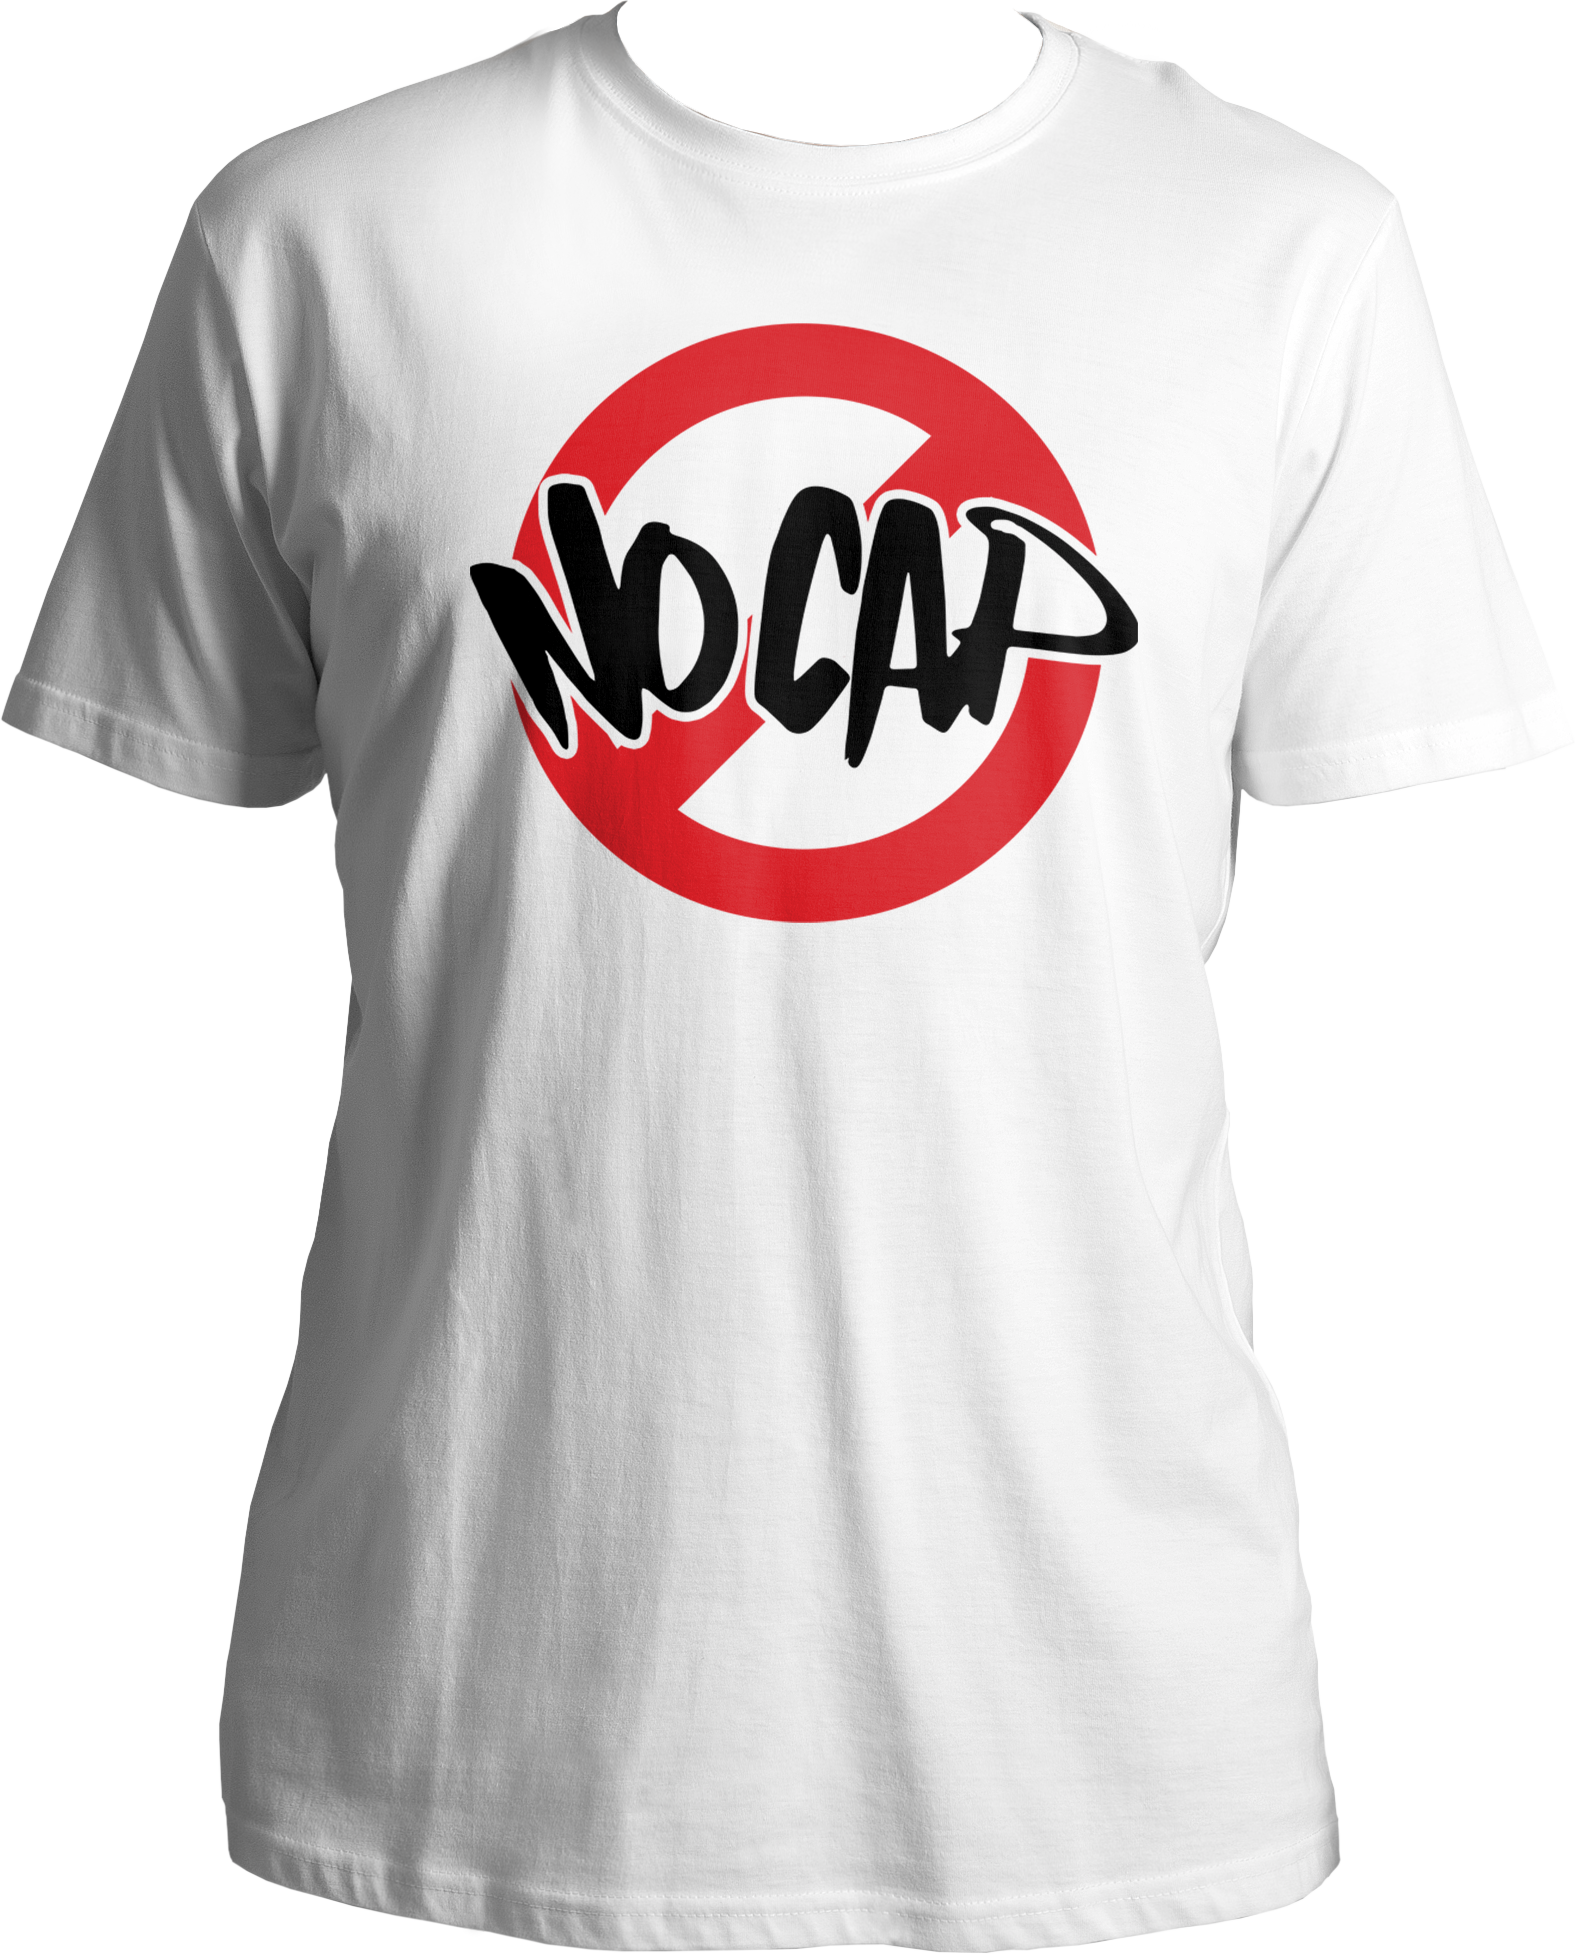 Step up your style game with the No Cap Unisex Cotton T-Shirt, straight outta Kr$na's lyrical universe. This tee's got the swagger, the flow, and the vibe, just like the man himself. You know when Kr$na drops bars, it's all fire, no cap, and this shirt's no different.